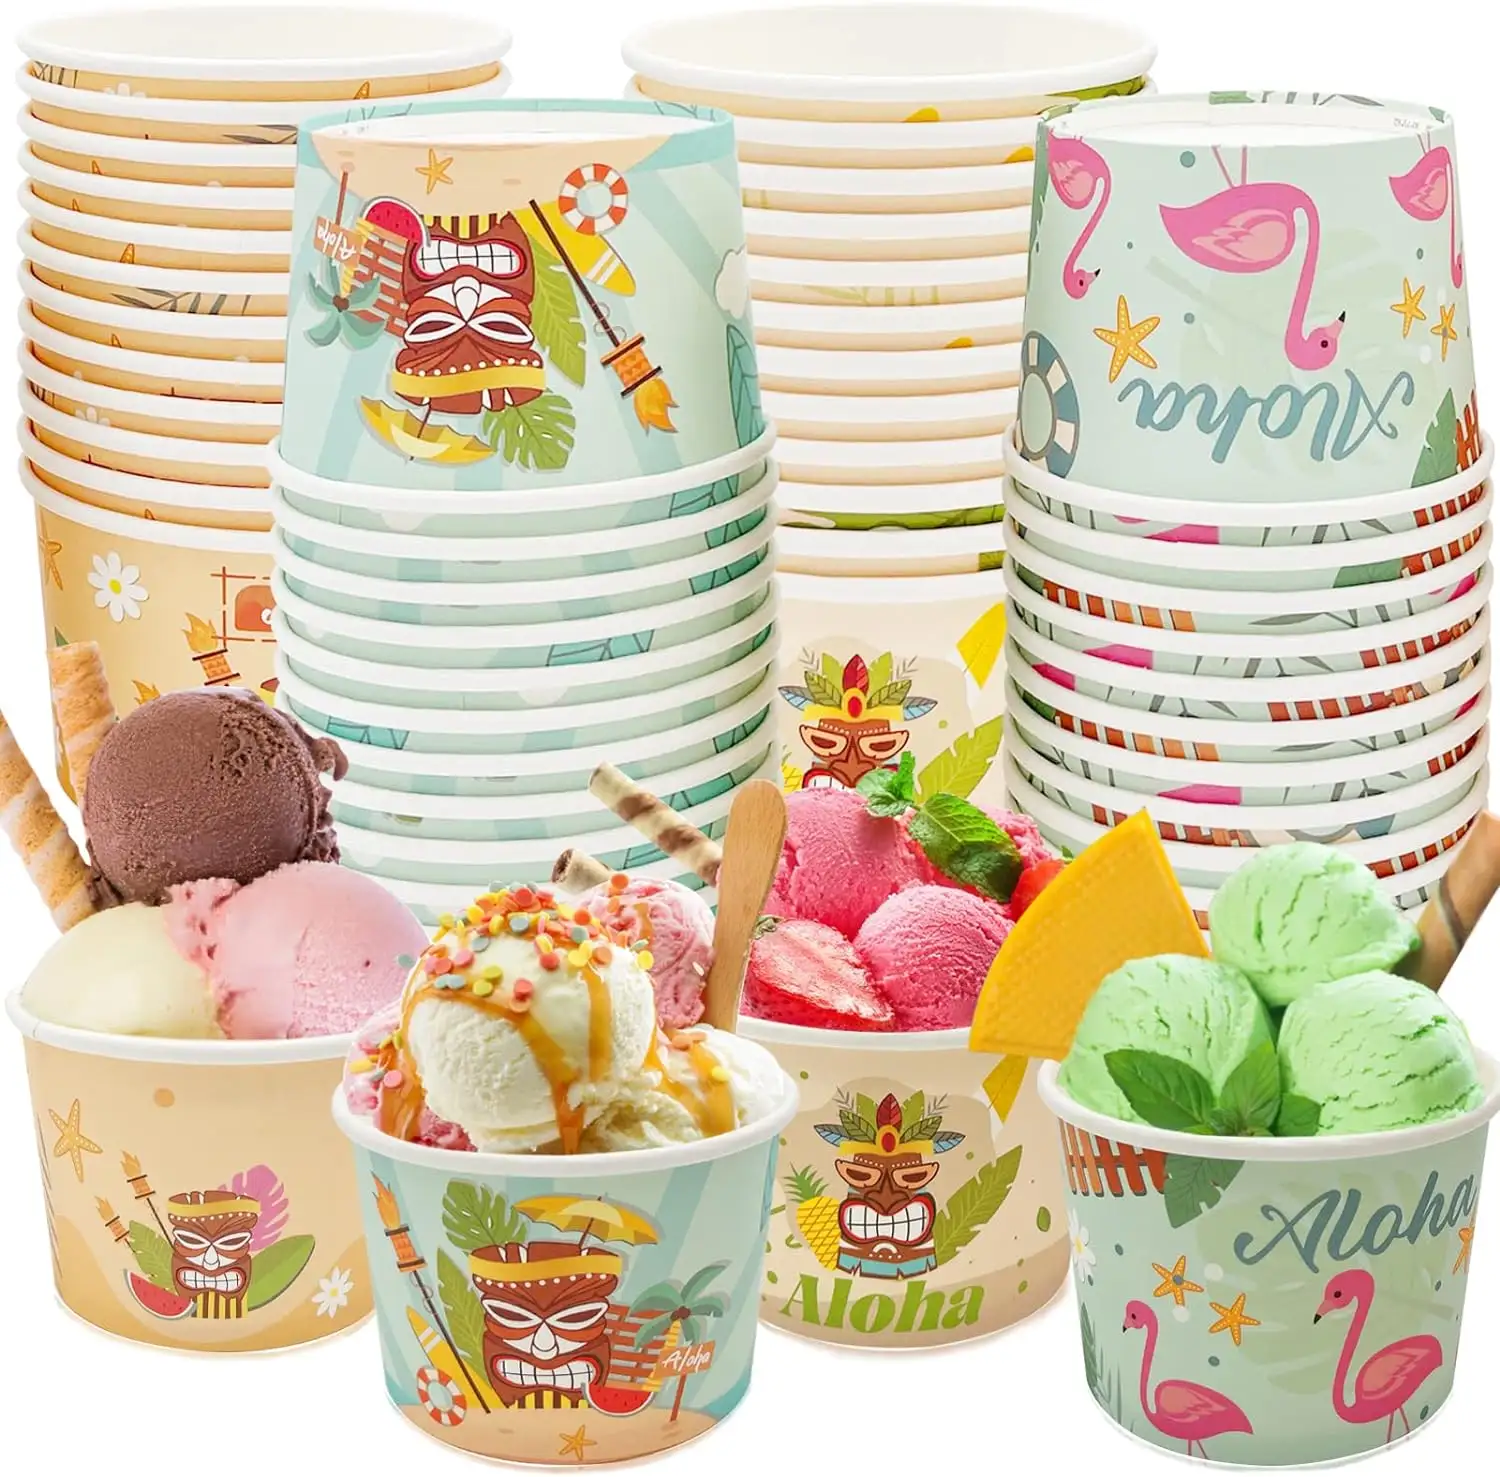 24 Packs 8oz Tropical Luau Party Paper Cups Bowls Disposable Hawaiian Beach Snack Dessert Soup Bowls Food Use Folders Included